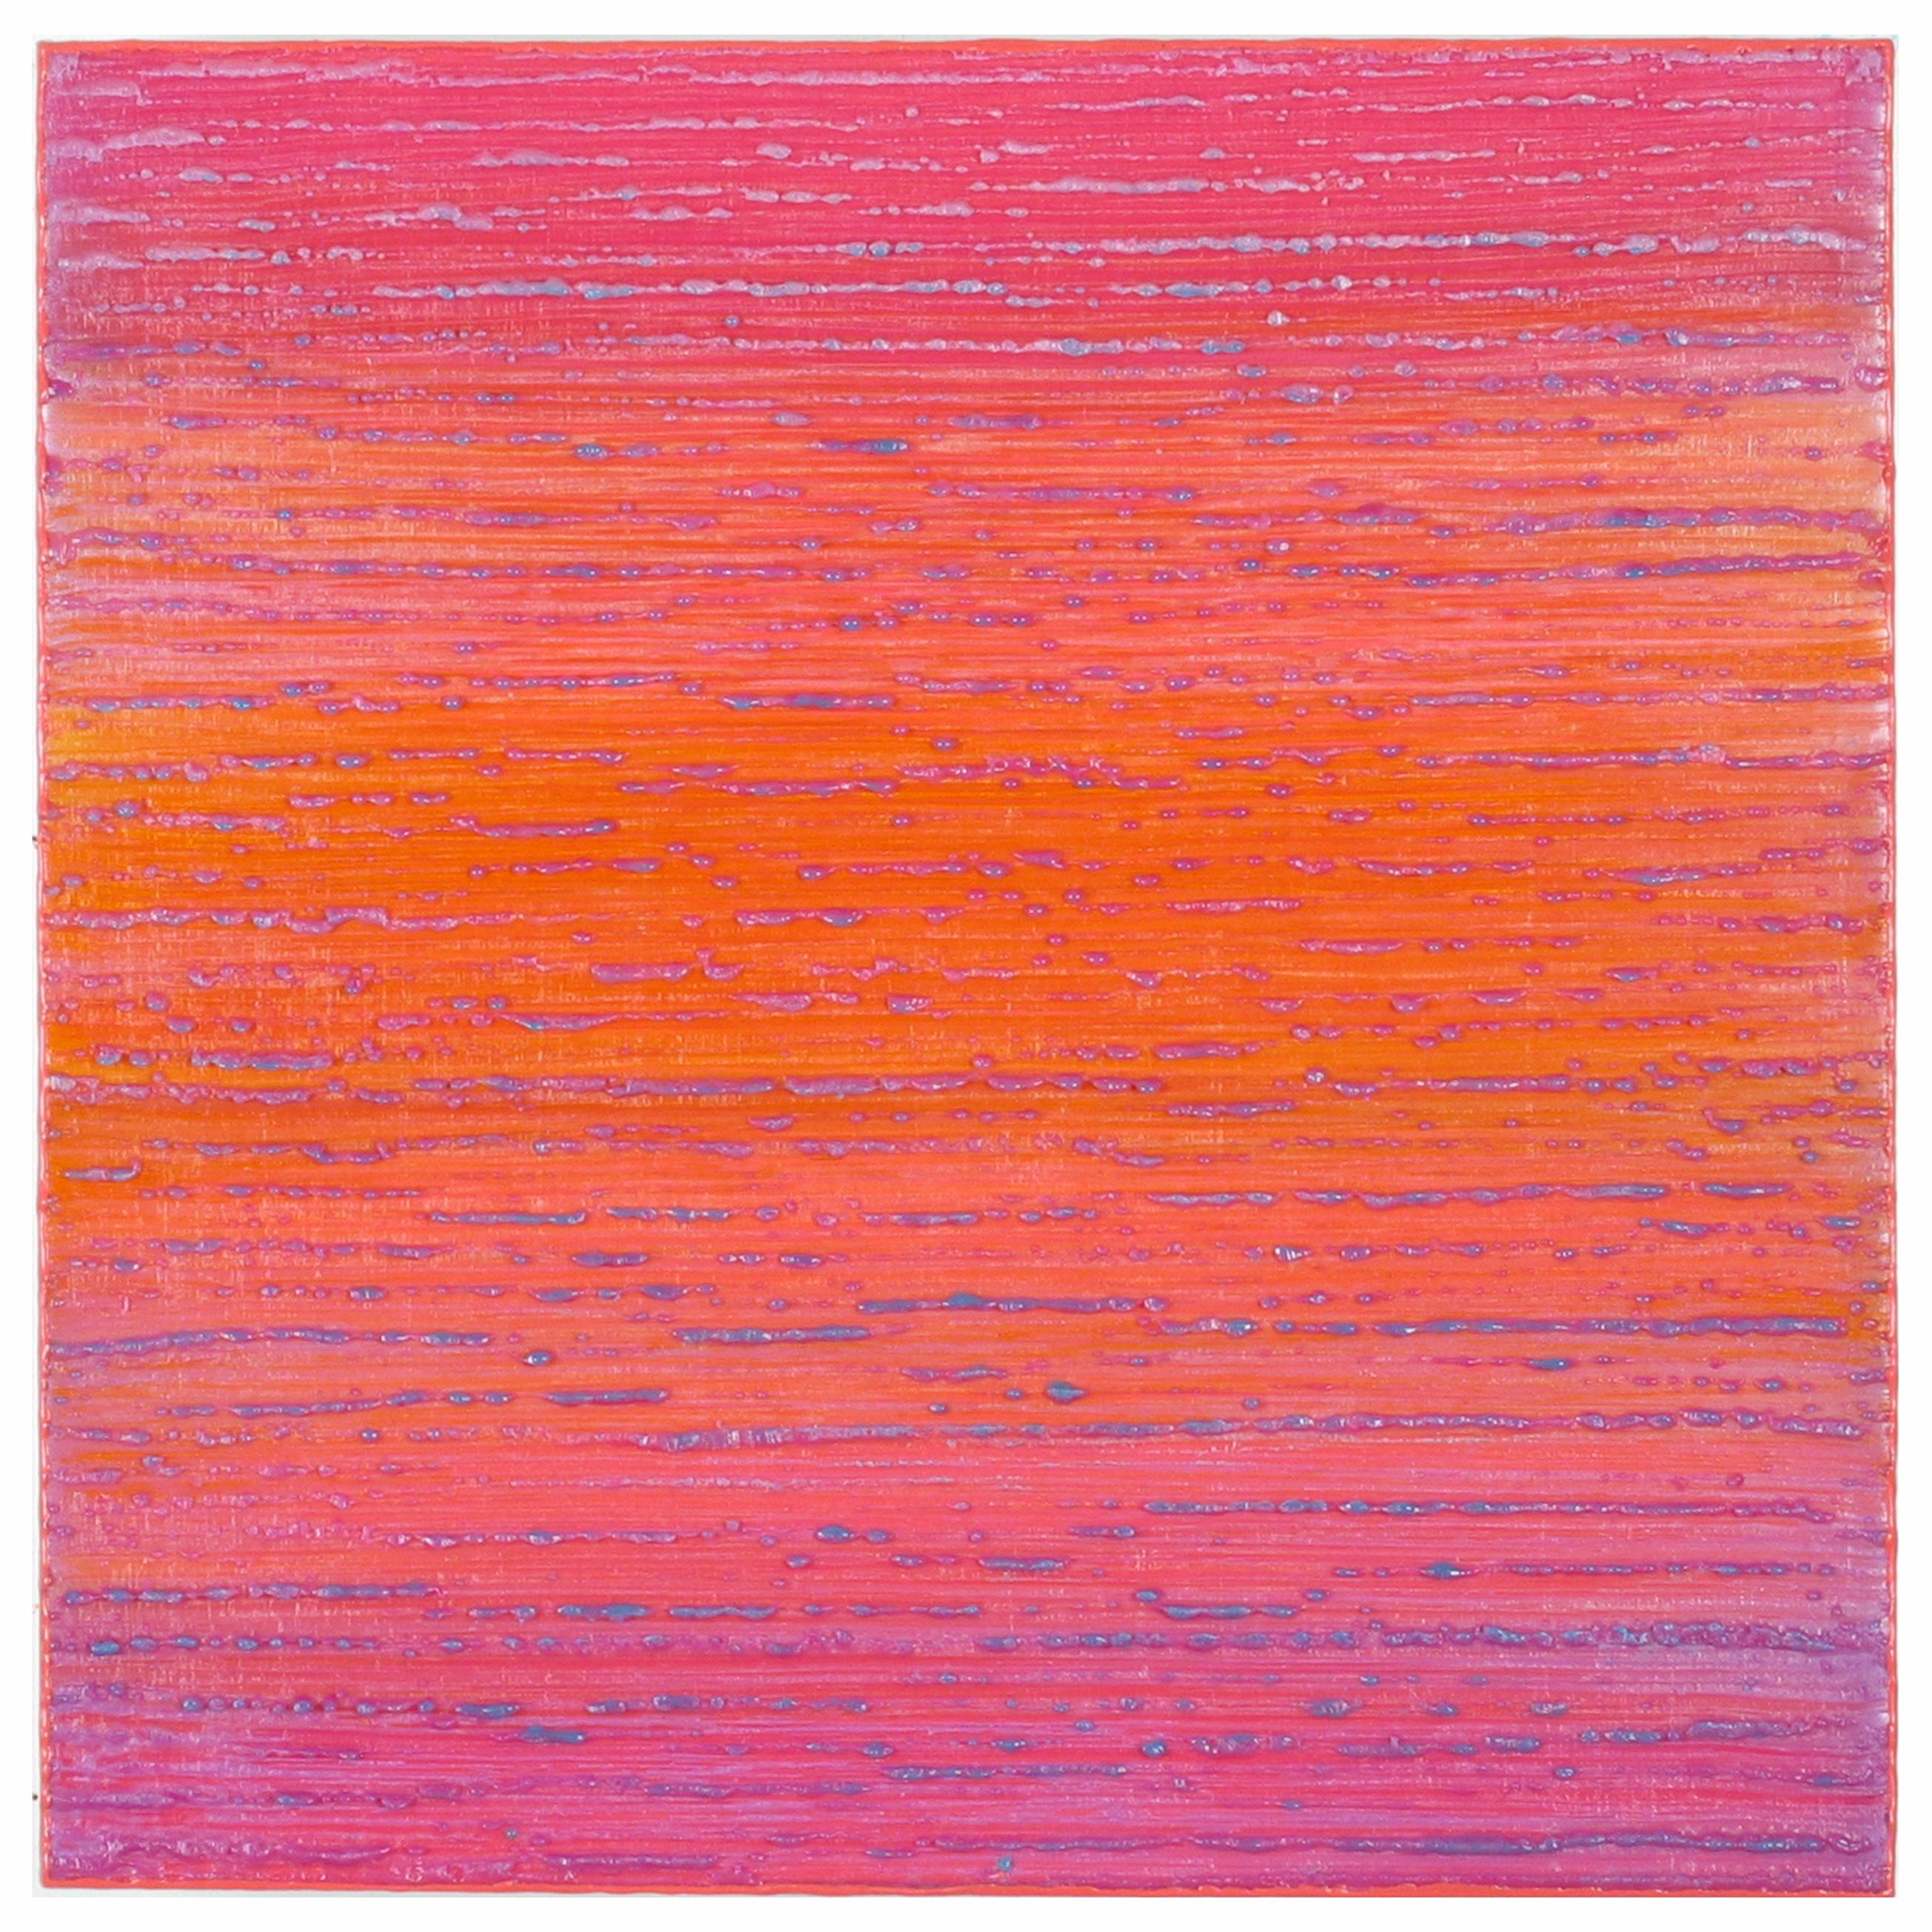 Silk Road 346, 2016, encaustic on panel, 12 x 12 x 2 inches - Color-Field Painting by Joanne Mattera